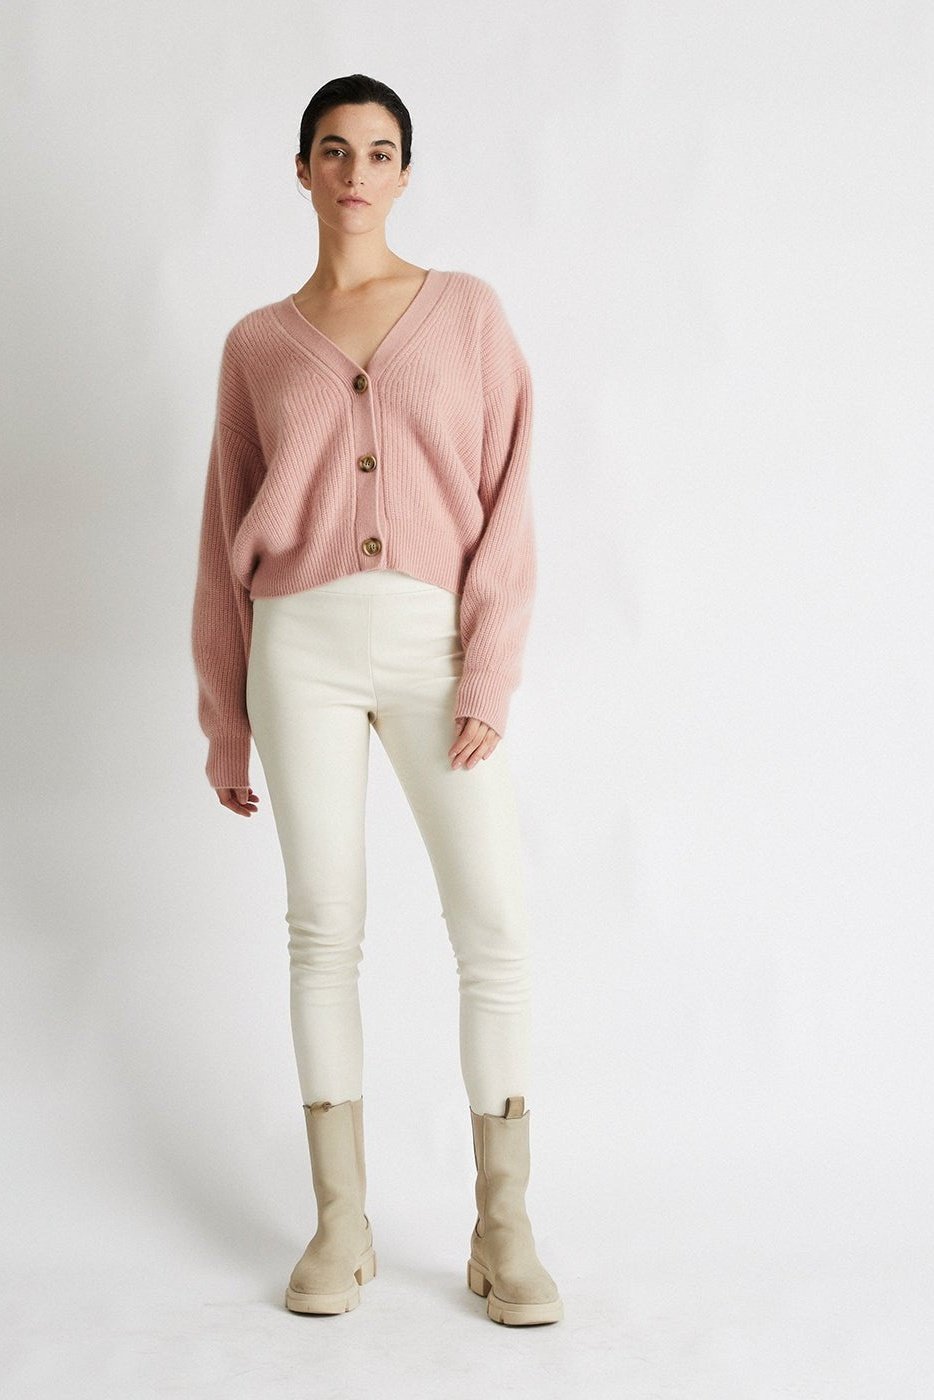 +Beryll Cashmere Cardigan Sweater | Baby Pink - +Beryll Cashmere Cardigan Sweater | Baby Pink - +Beryll Worn By Good People